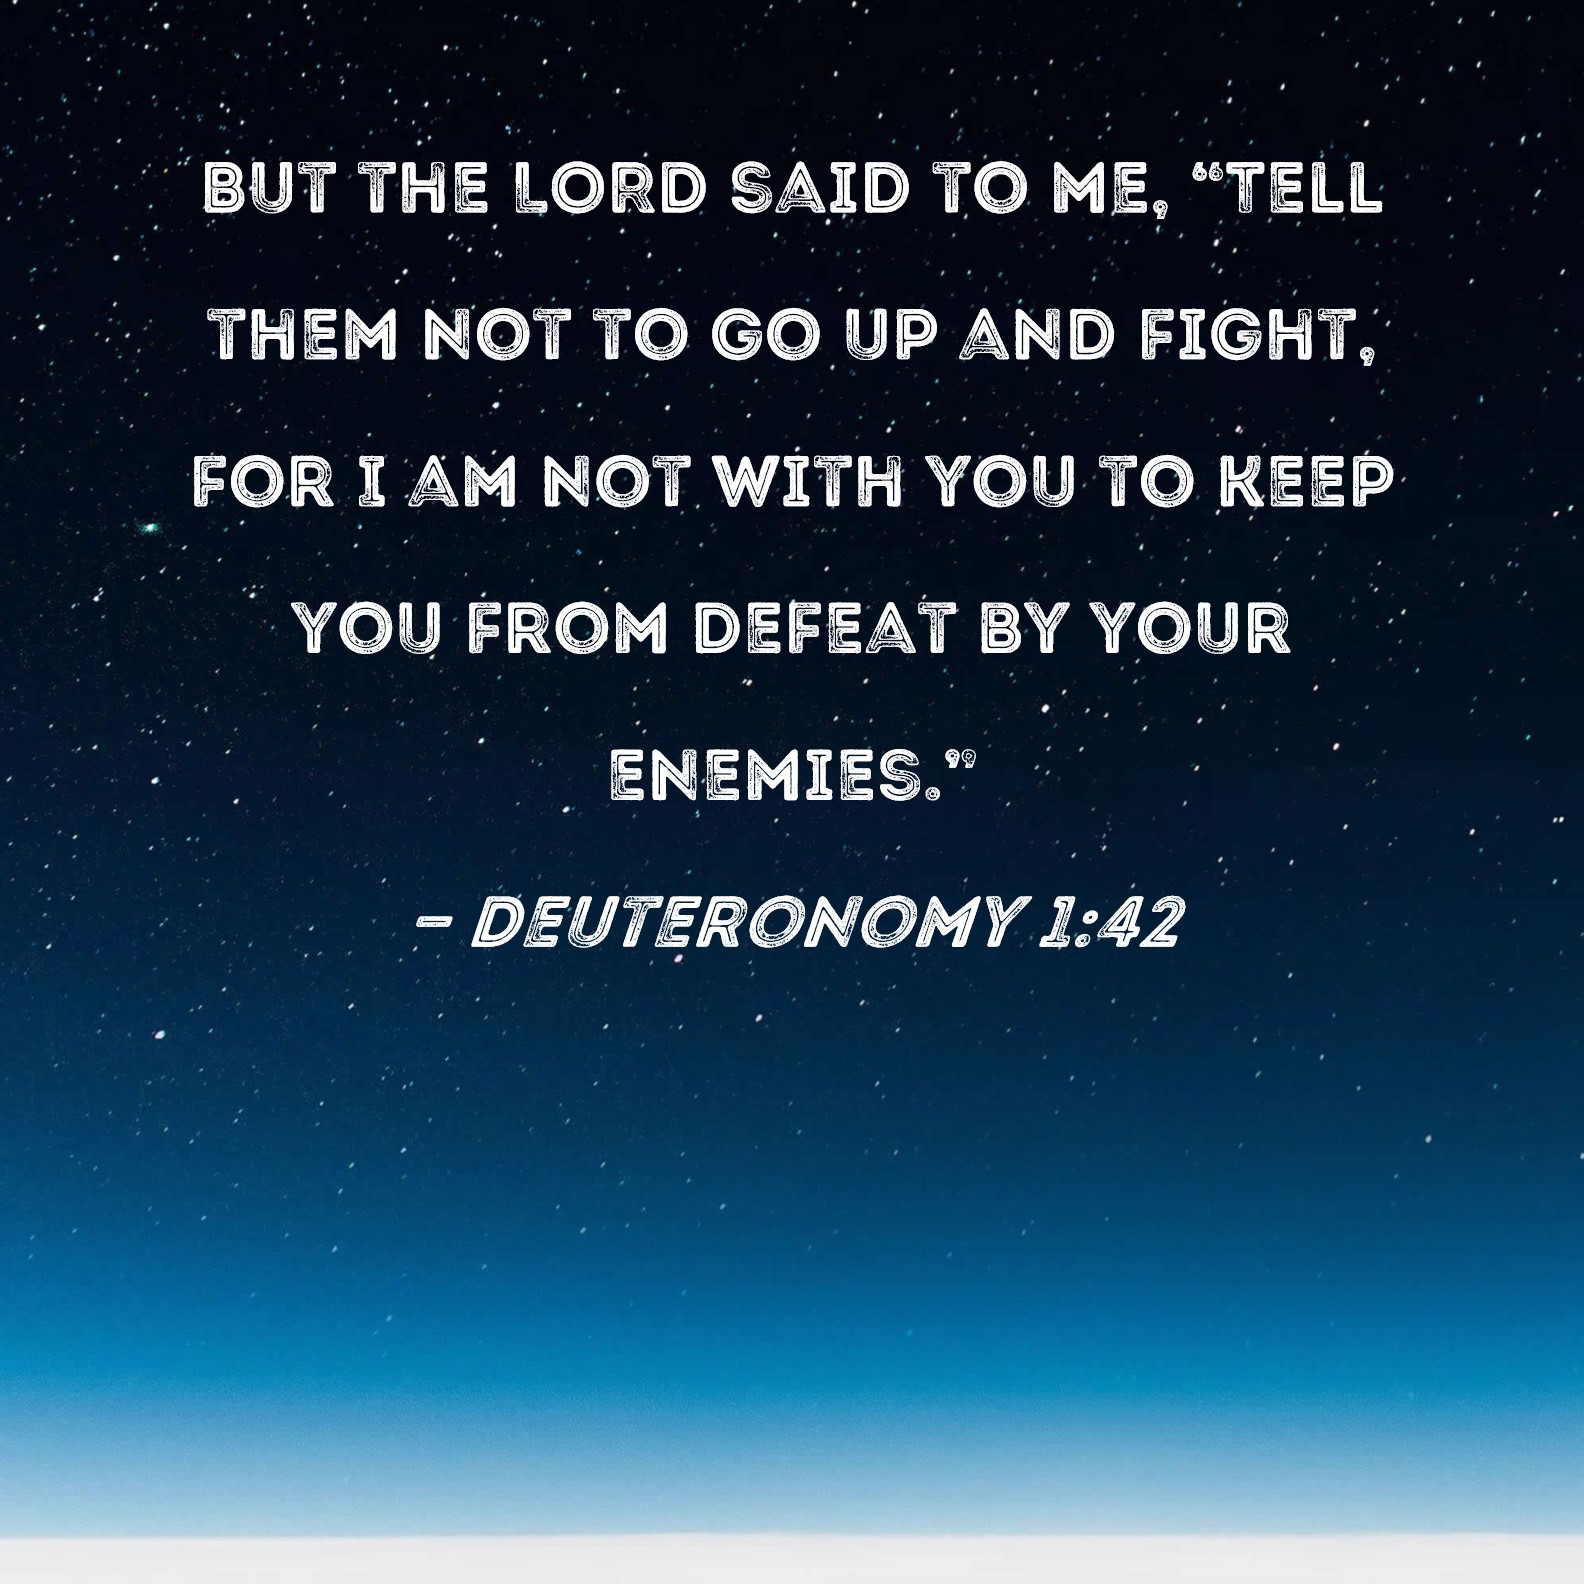 What does the Bible say about extreme fighting?